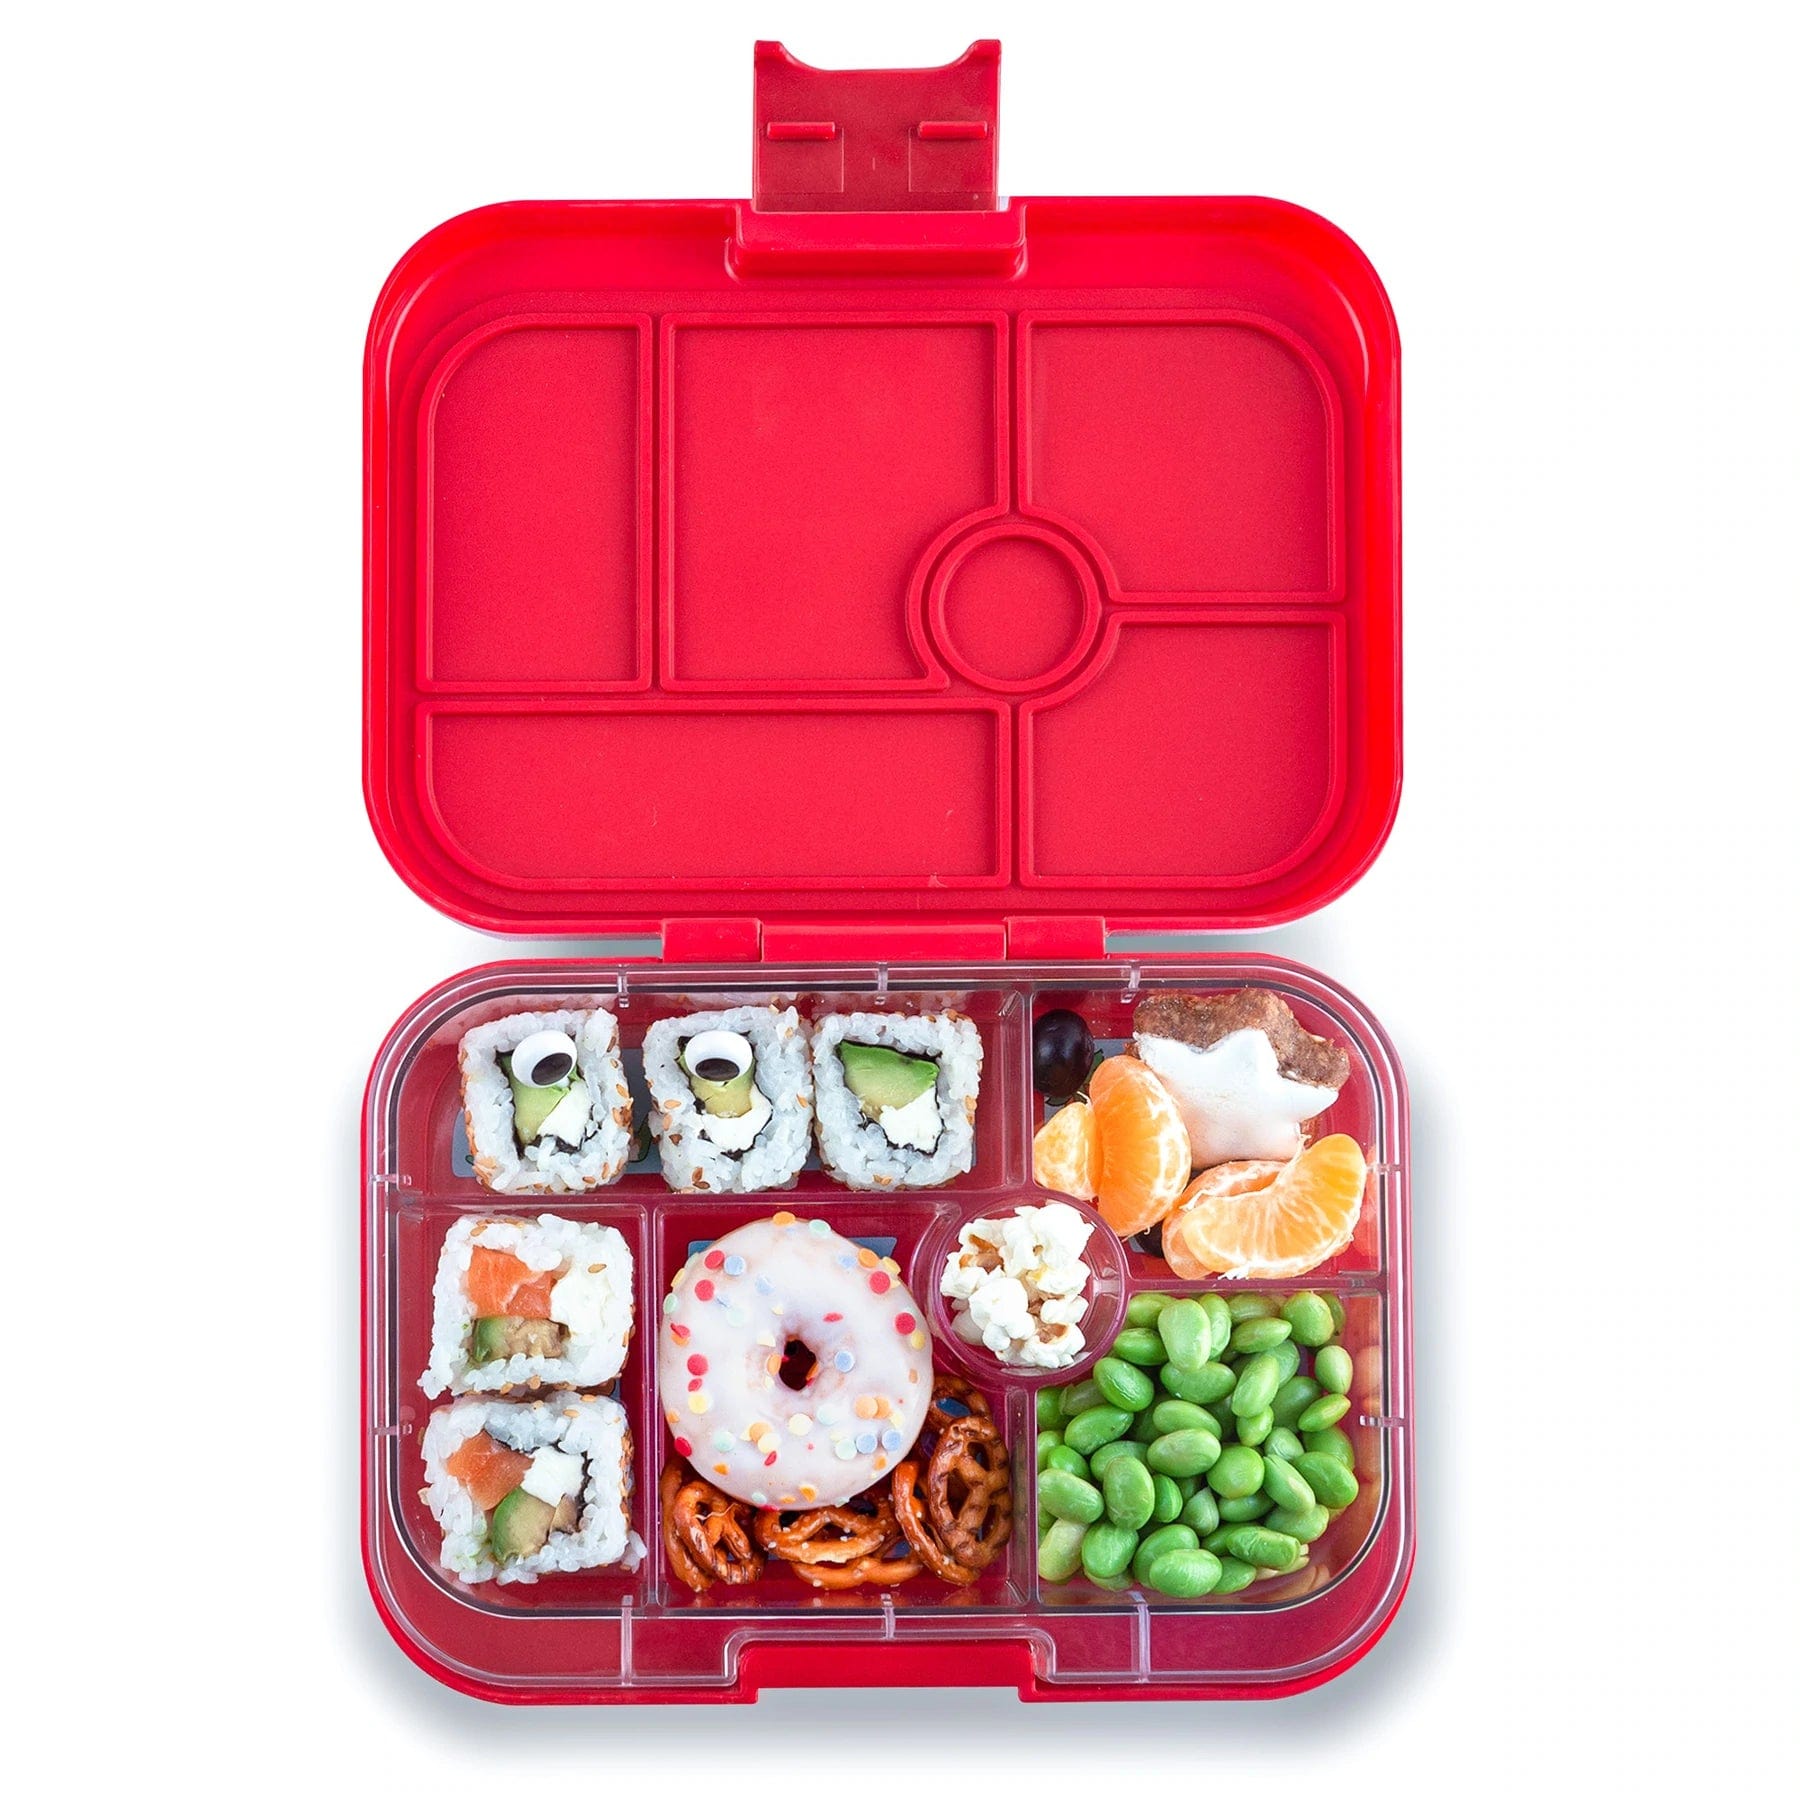 6 Fun Lunchbox Ideas For Your Yumbox